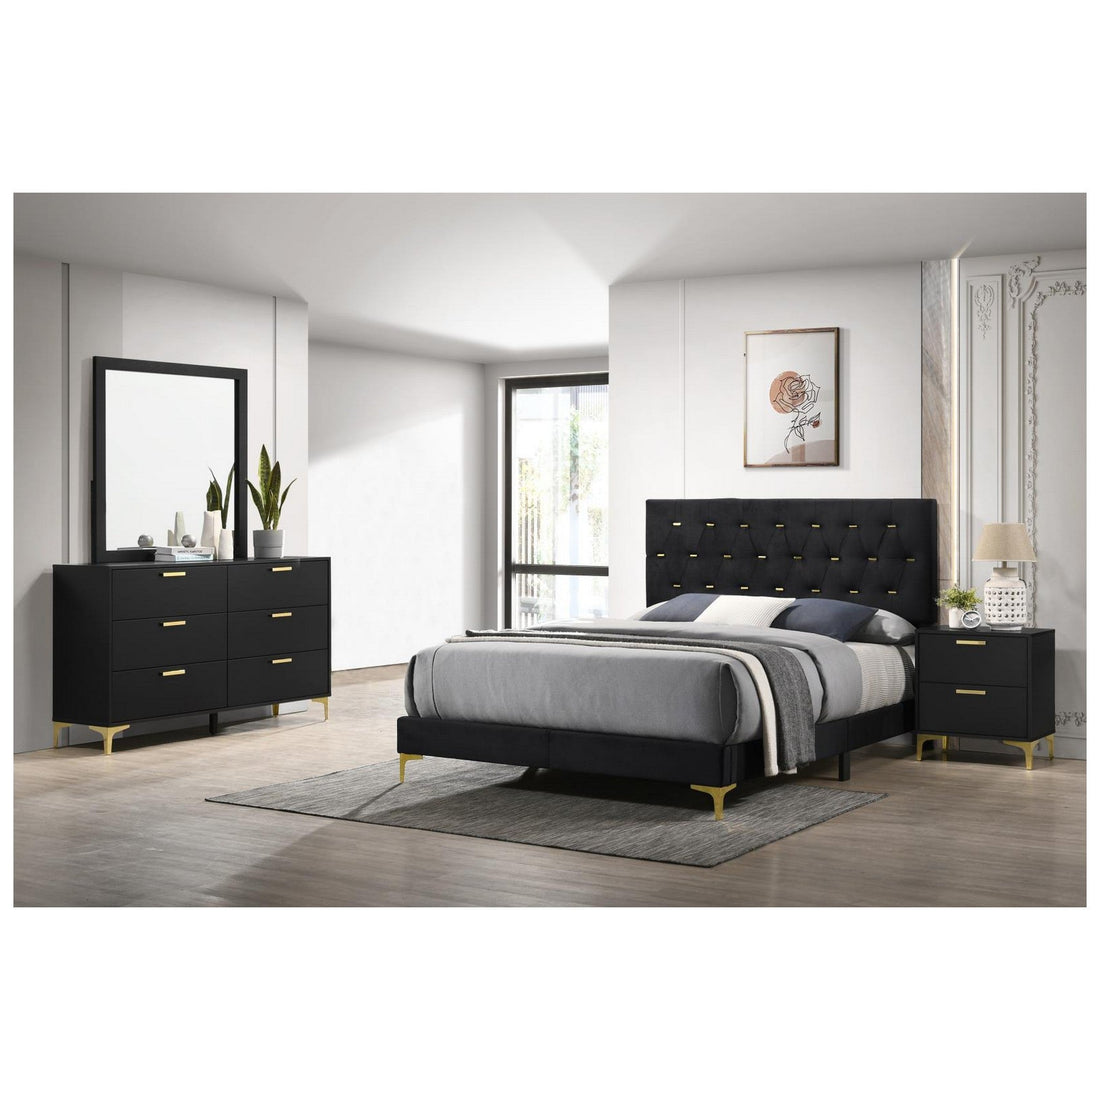 Kendall 4-piece Tufted Panel California King Bedroom Set Black and Gold 224451KW-S4